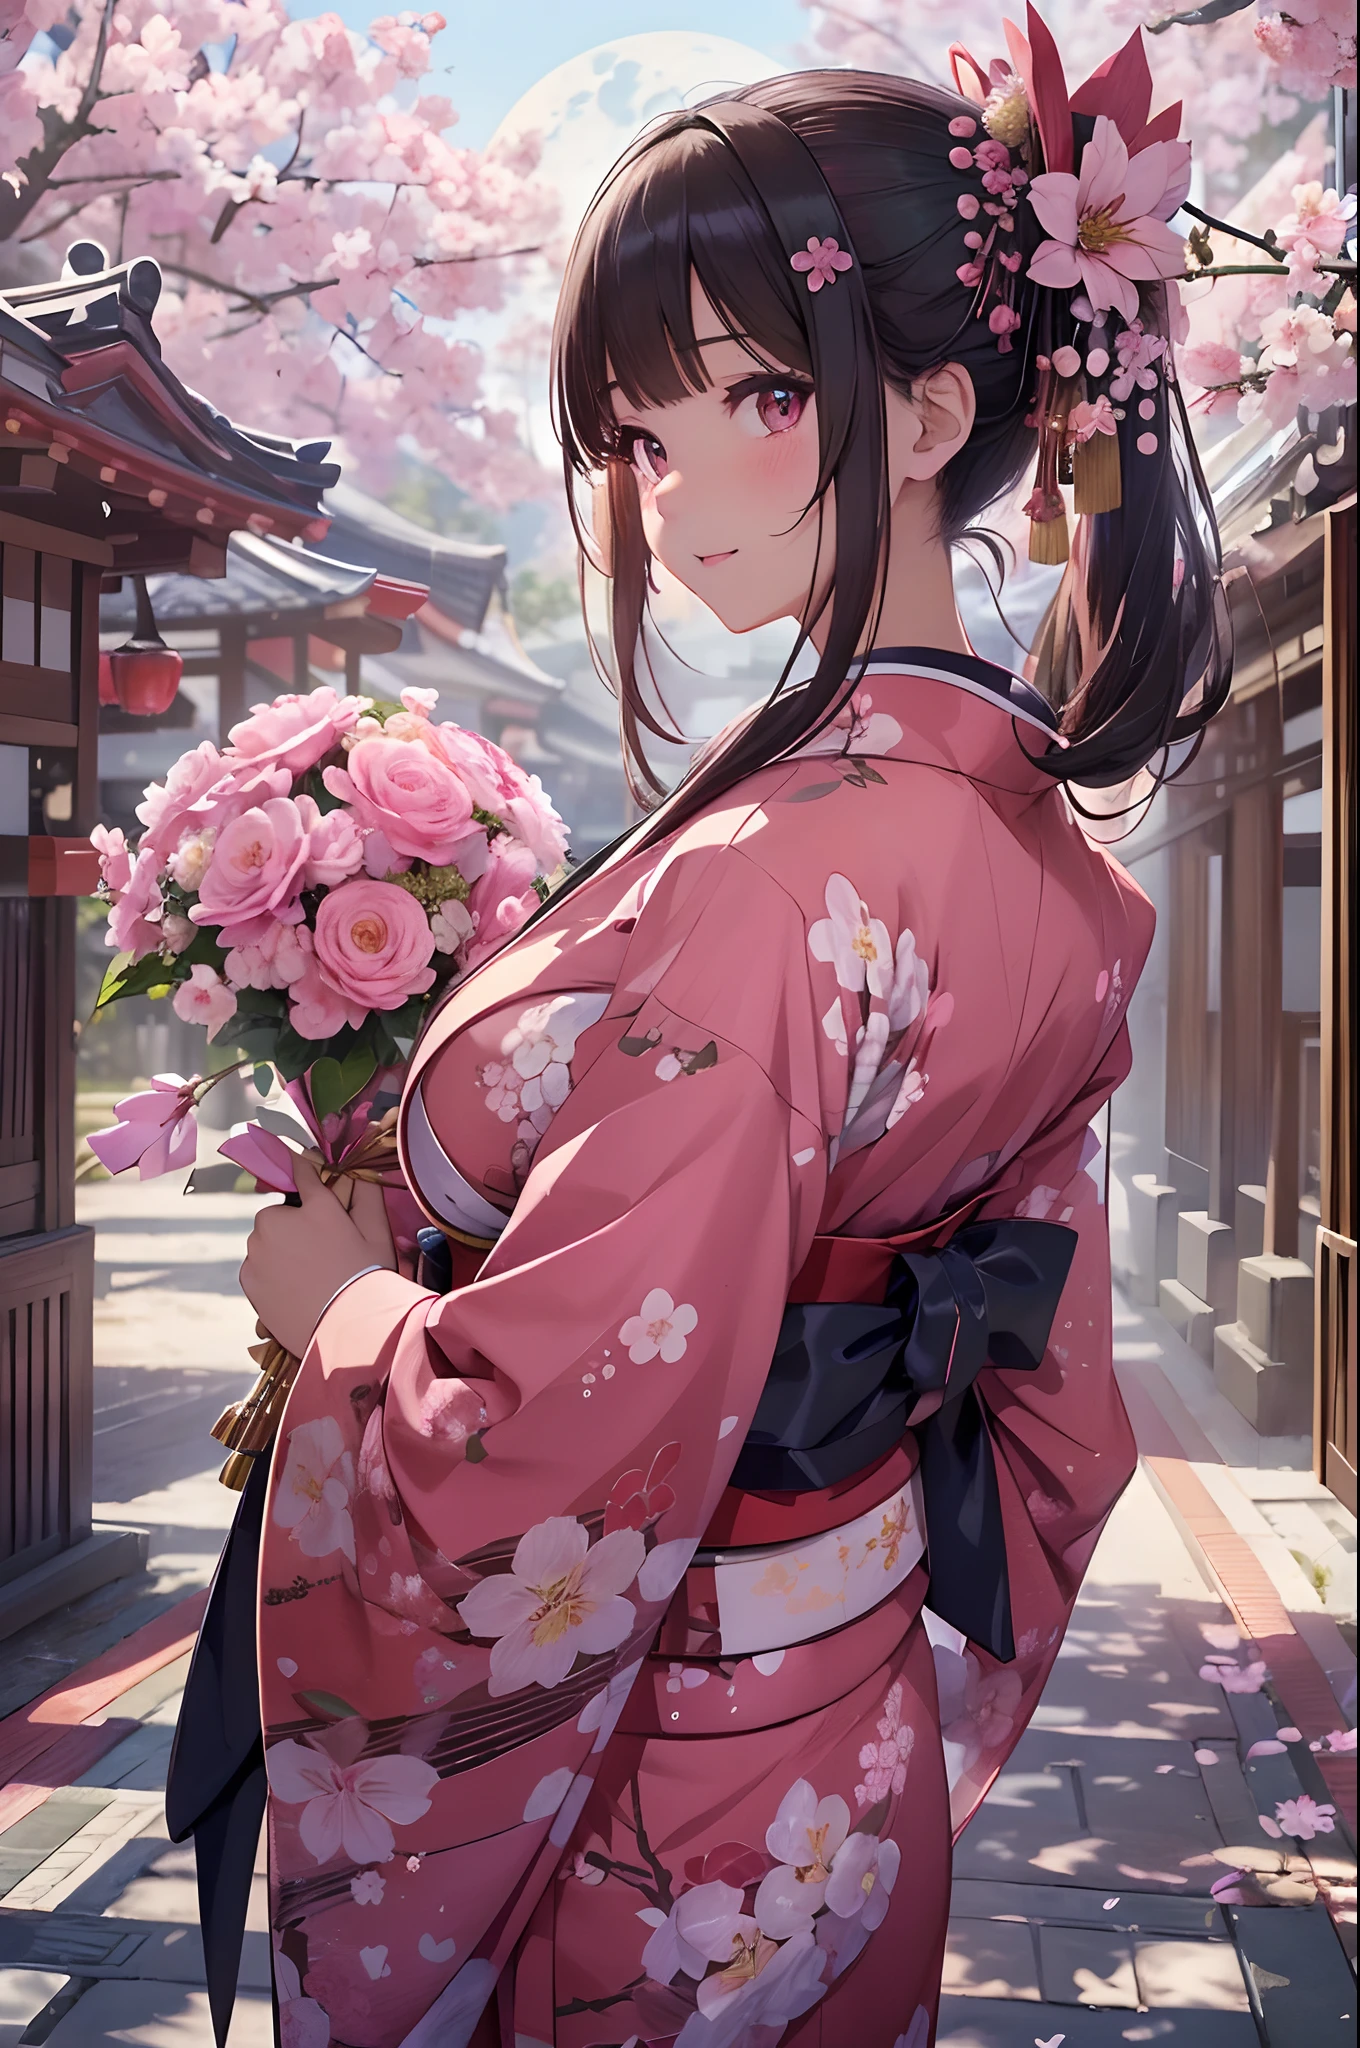 ((masterpiece1.5)),hyper quality, Hyper Detailed,Perfect drawing,1girl in,((Bigger breasts)),kawaii ,With smiling eyes,(((Beautiful kimono))),(((Luxury kimono)))、(Beautiful embroidery),。.。.3D Photography,16K illustrations,((clearface)),Hi-Res,nice background、(((beatiful backgrounds)))、(((Detailed drawing)))、Perfect Beautiful Girl、(((Perfect Photo)))、kirakira、shiny、a gorgeous、high-class sense、A dark-haired、(((pink seduction background)))、(thin-waist)、top-quality、Red face、​master piece,hyper quality, Hyper Detailed,Perfect drawing,。.。.。.3D,16K illustrations、Hi-Res、1 persons、japanaese girl、A dark-haired、poneyTail、Red ribbons、Cute even though her eyes are tight、(((luxury
kimono)))、(((In a wrapped bouquet)))、((Plum blossoms))、((peach blossoms))、((cherryblossom))、Back view、Detailed drawing、Best Quality, Capture super cute moments, depth of fields, ultra-detailliert,  High resolution, C4D, Octadale, 。.。.3D Modeling, Delicate and detailed depiction、Shooting from the back diagonally below、((moonlights))、superclear、Full of charm、masuter pie